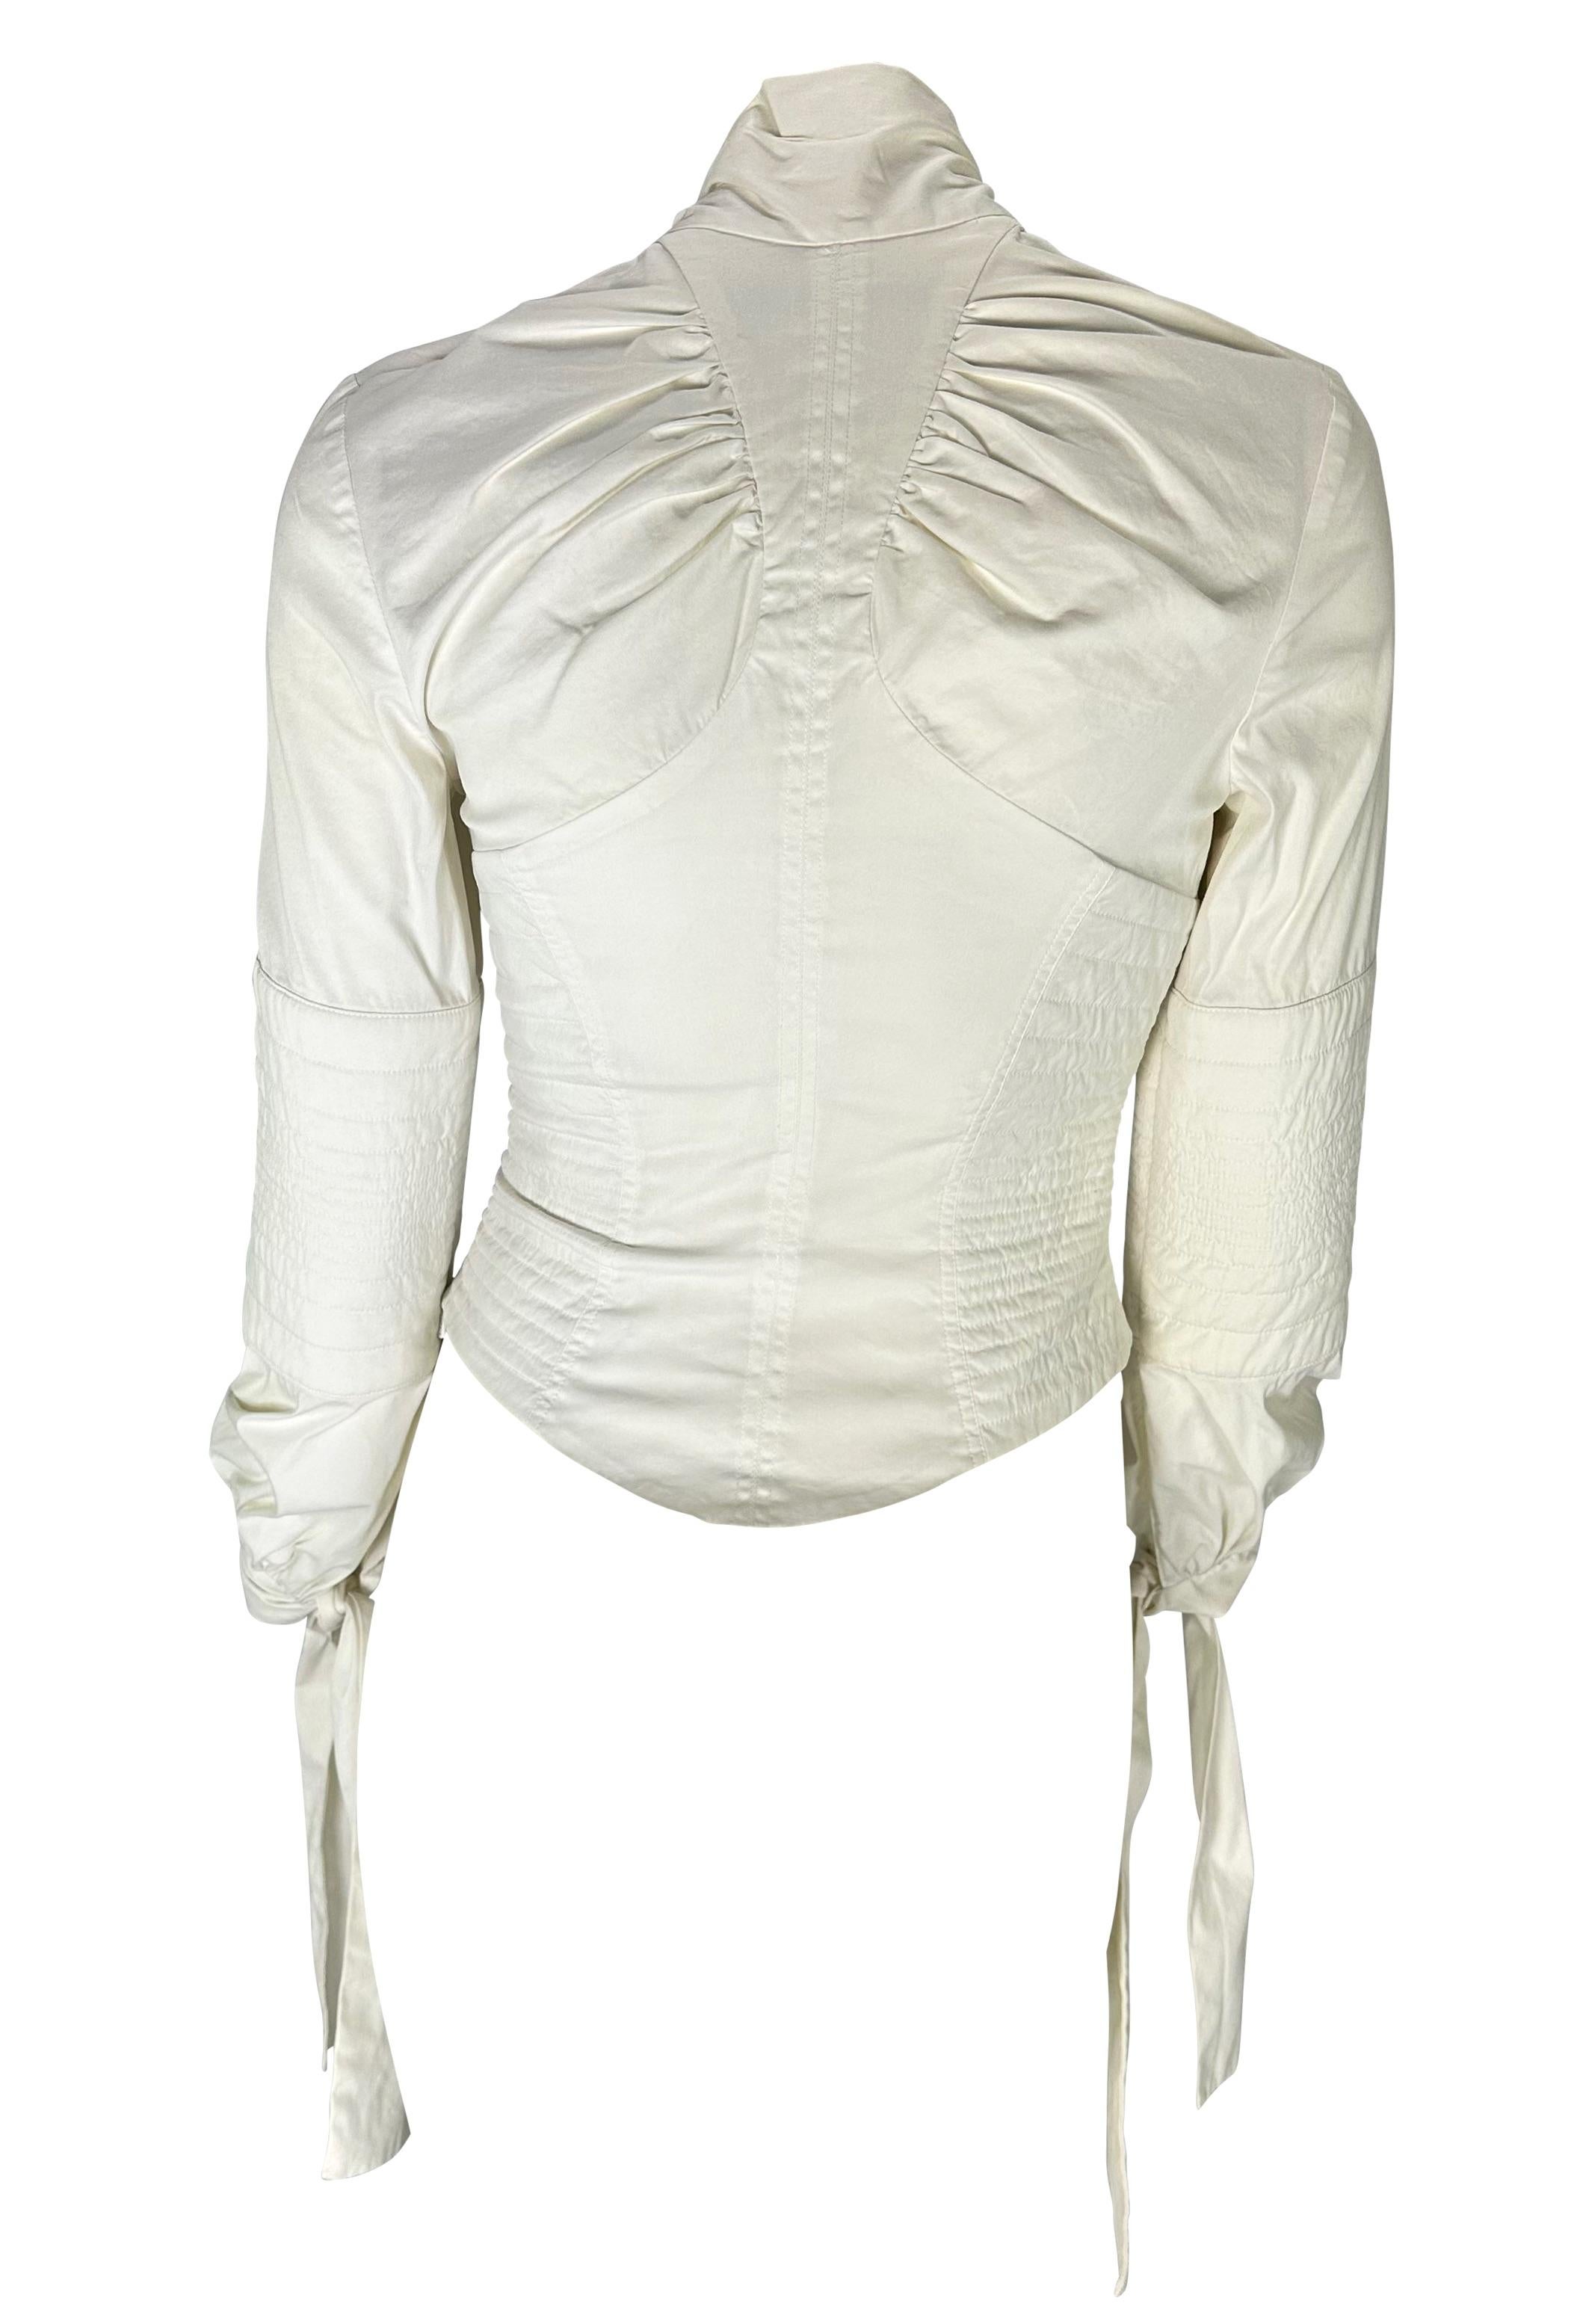 Women's F/W 2003 Gucci by Tom Ford Ruched White Stretch Cotton Quilted Tie Blouse For Sale